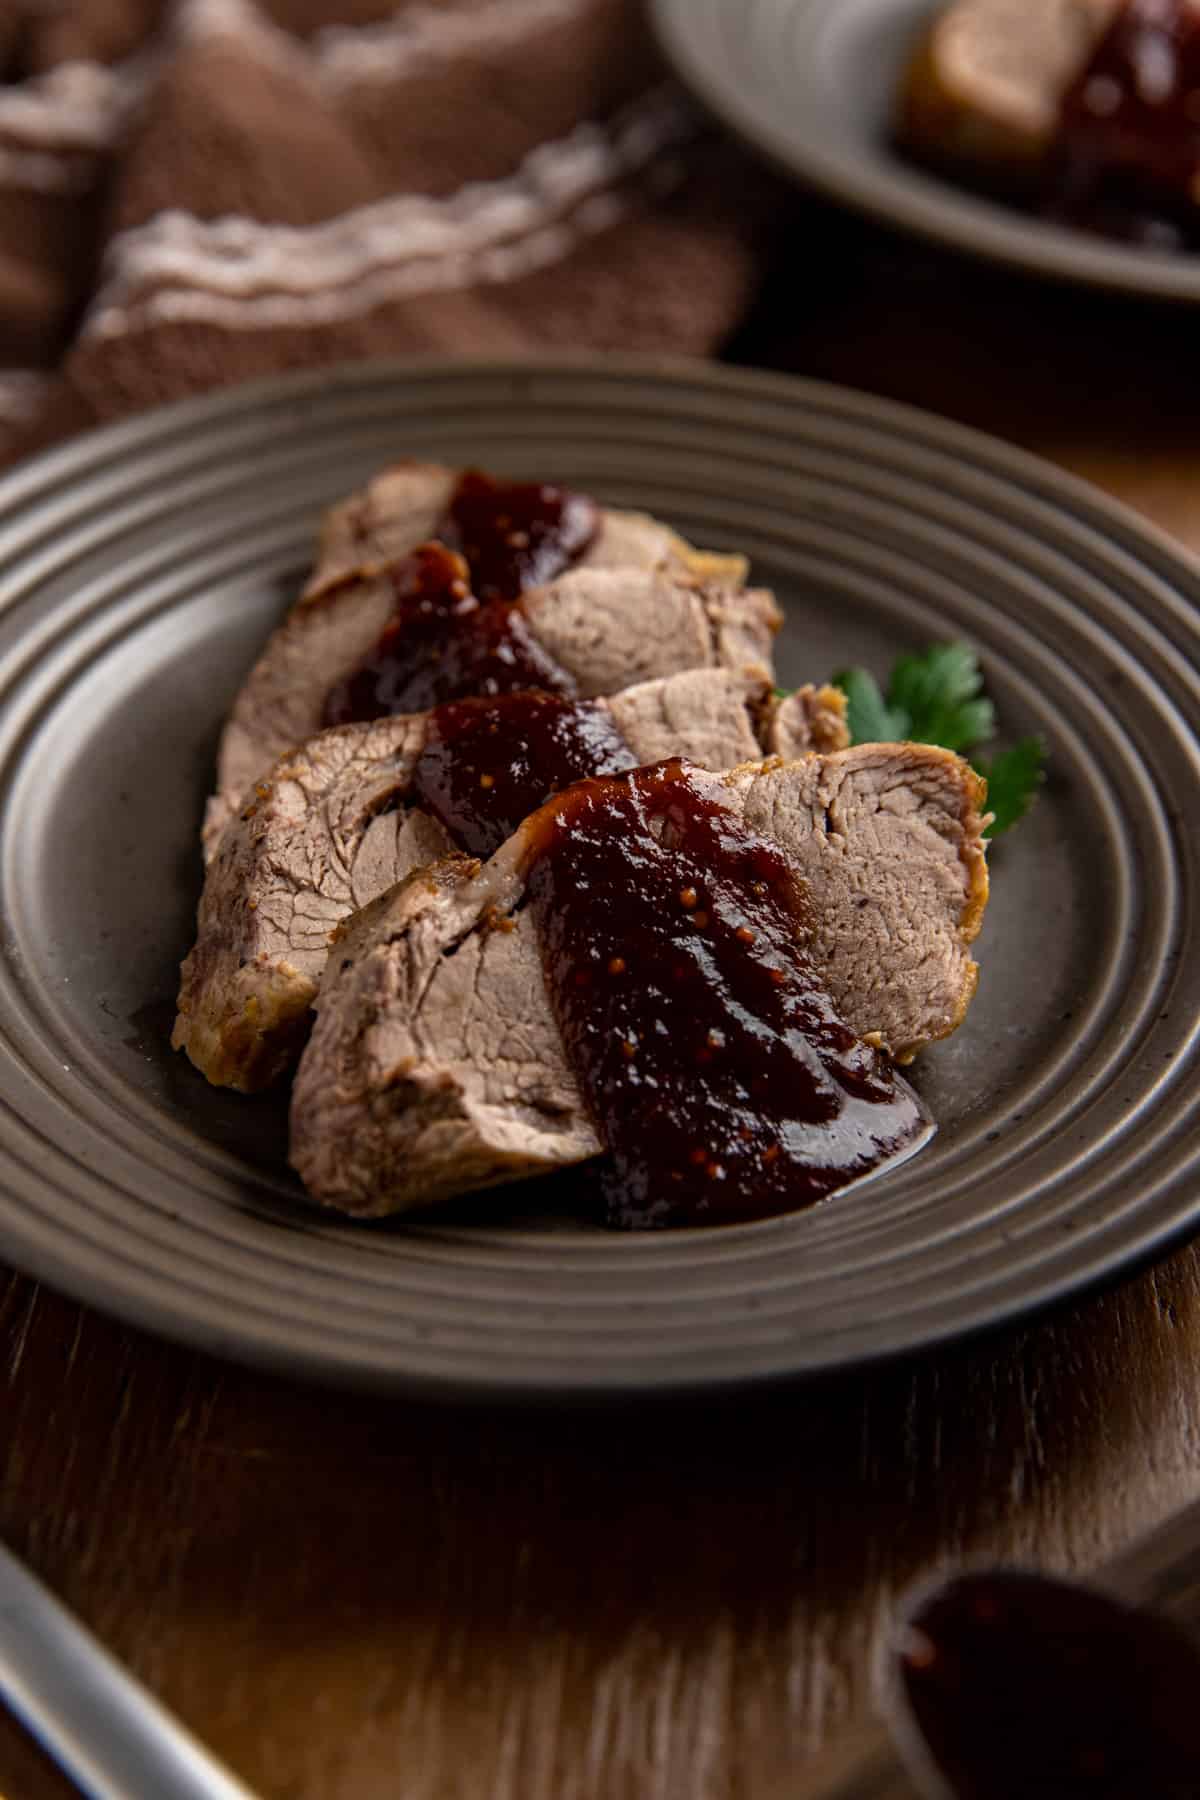 Four sliced of cooked pork tenderloin topped with sauce on brown plate.